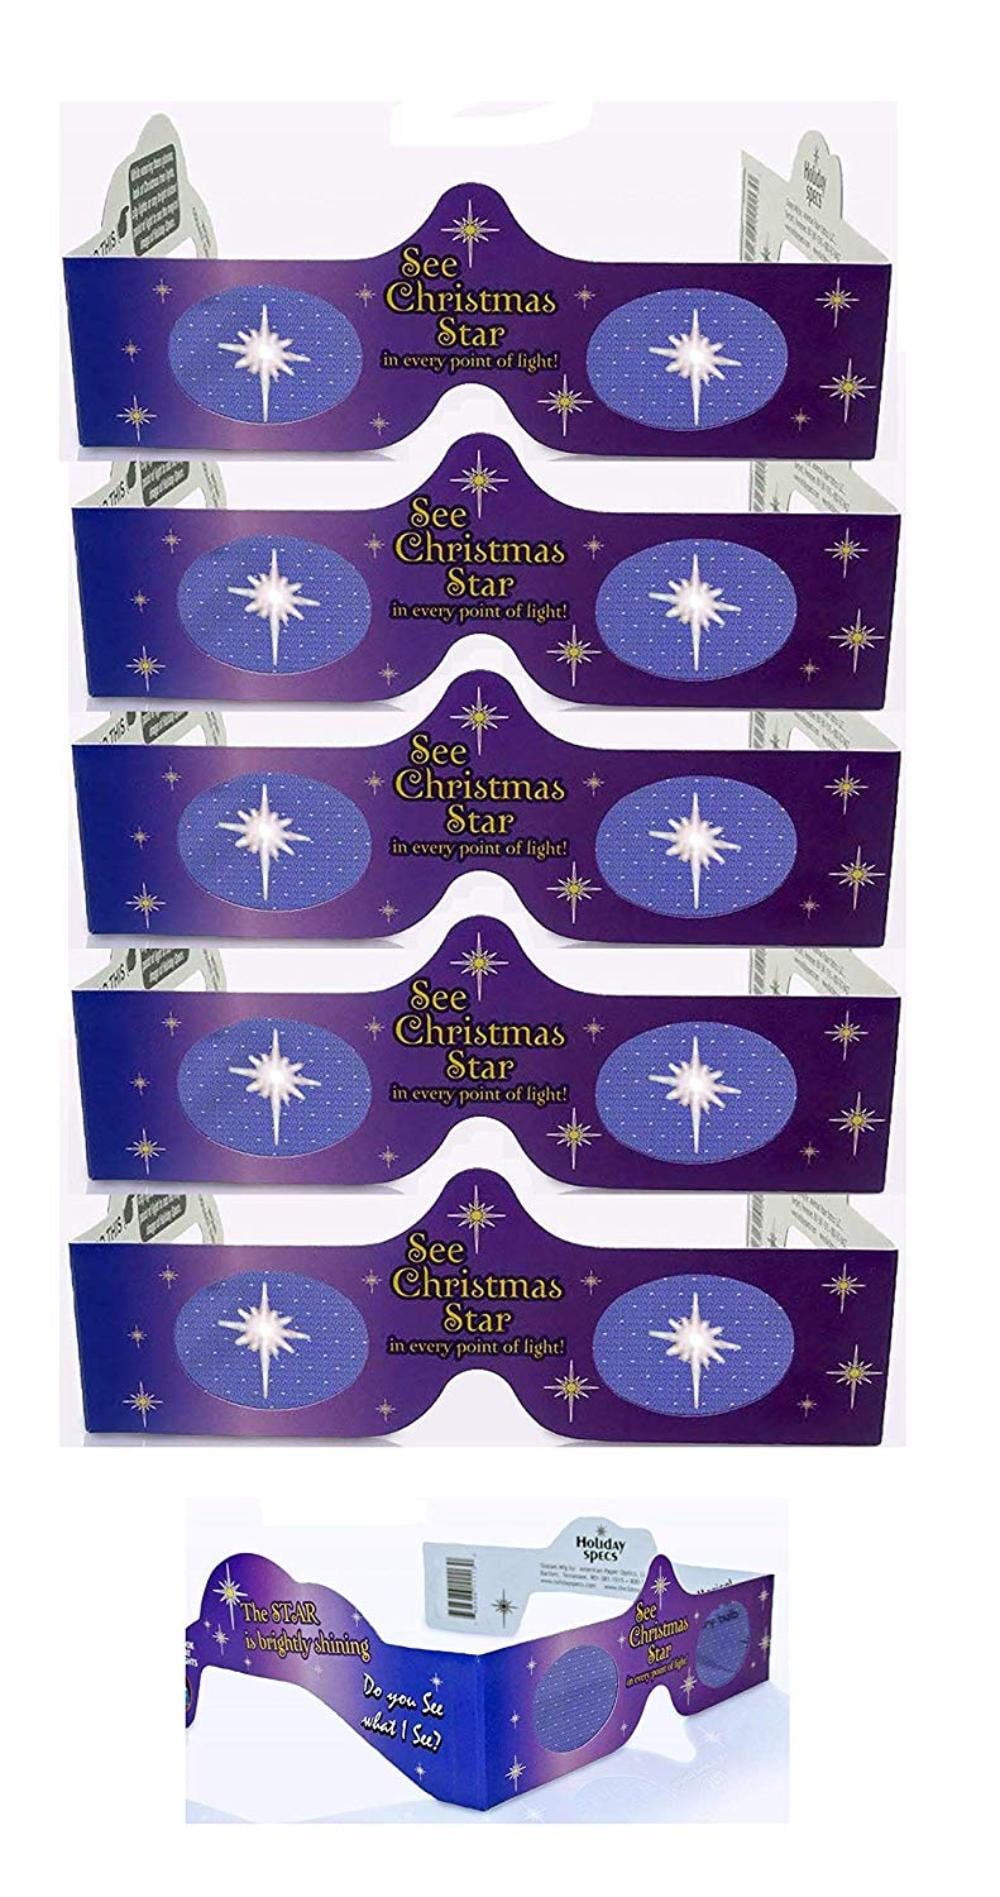 Our USA MADE Holiday Specs Are Perfect For Festivities! 5 Pack Turn Holiday Lights Into Magical Images 3D Christmas Glasses A Fun Christmas Experience At Every Point Of Light See GINGERBREAD